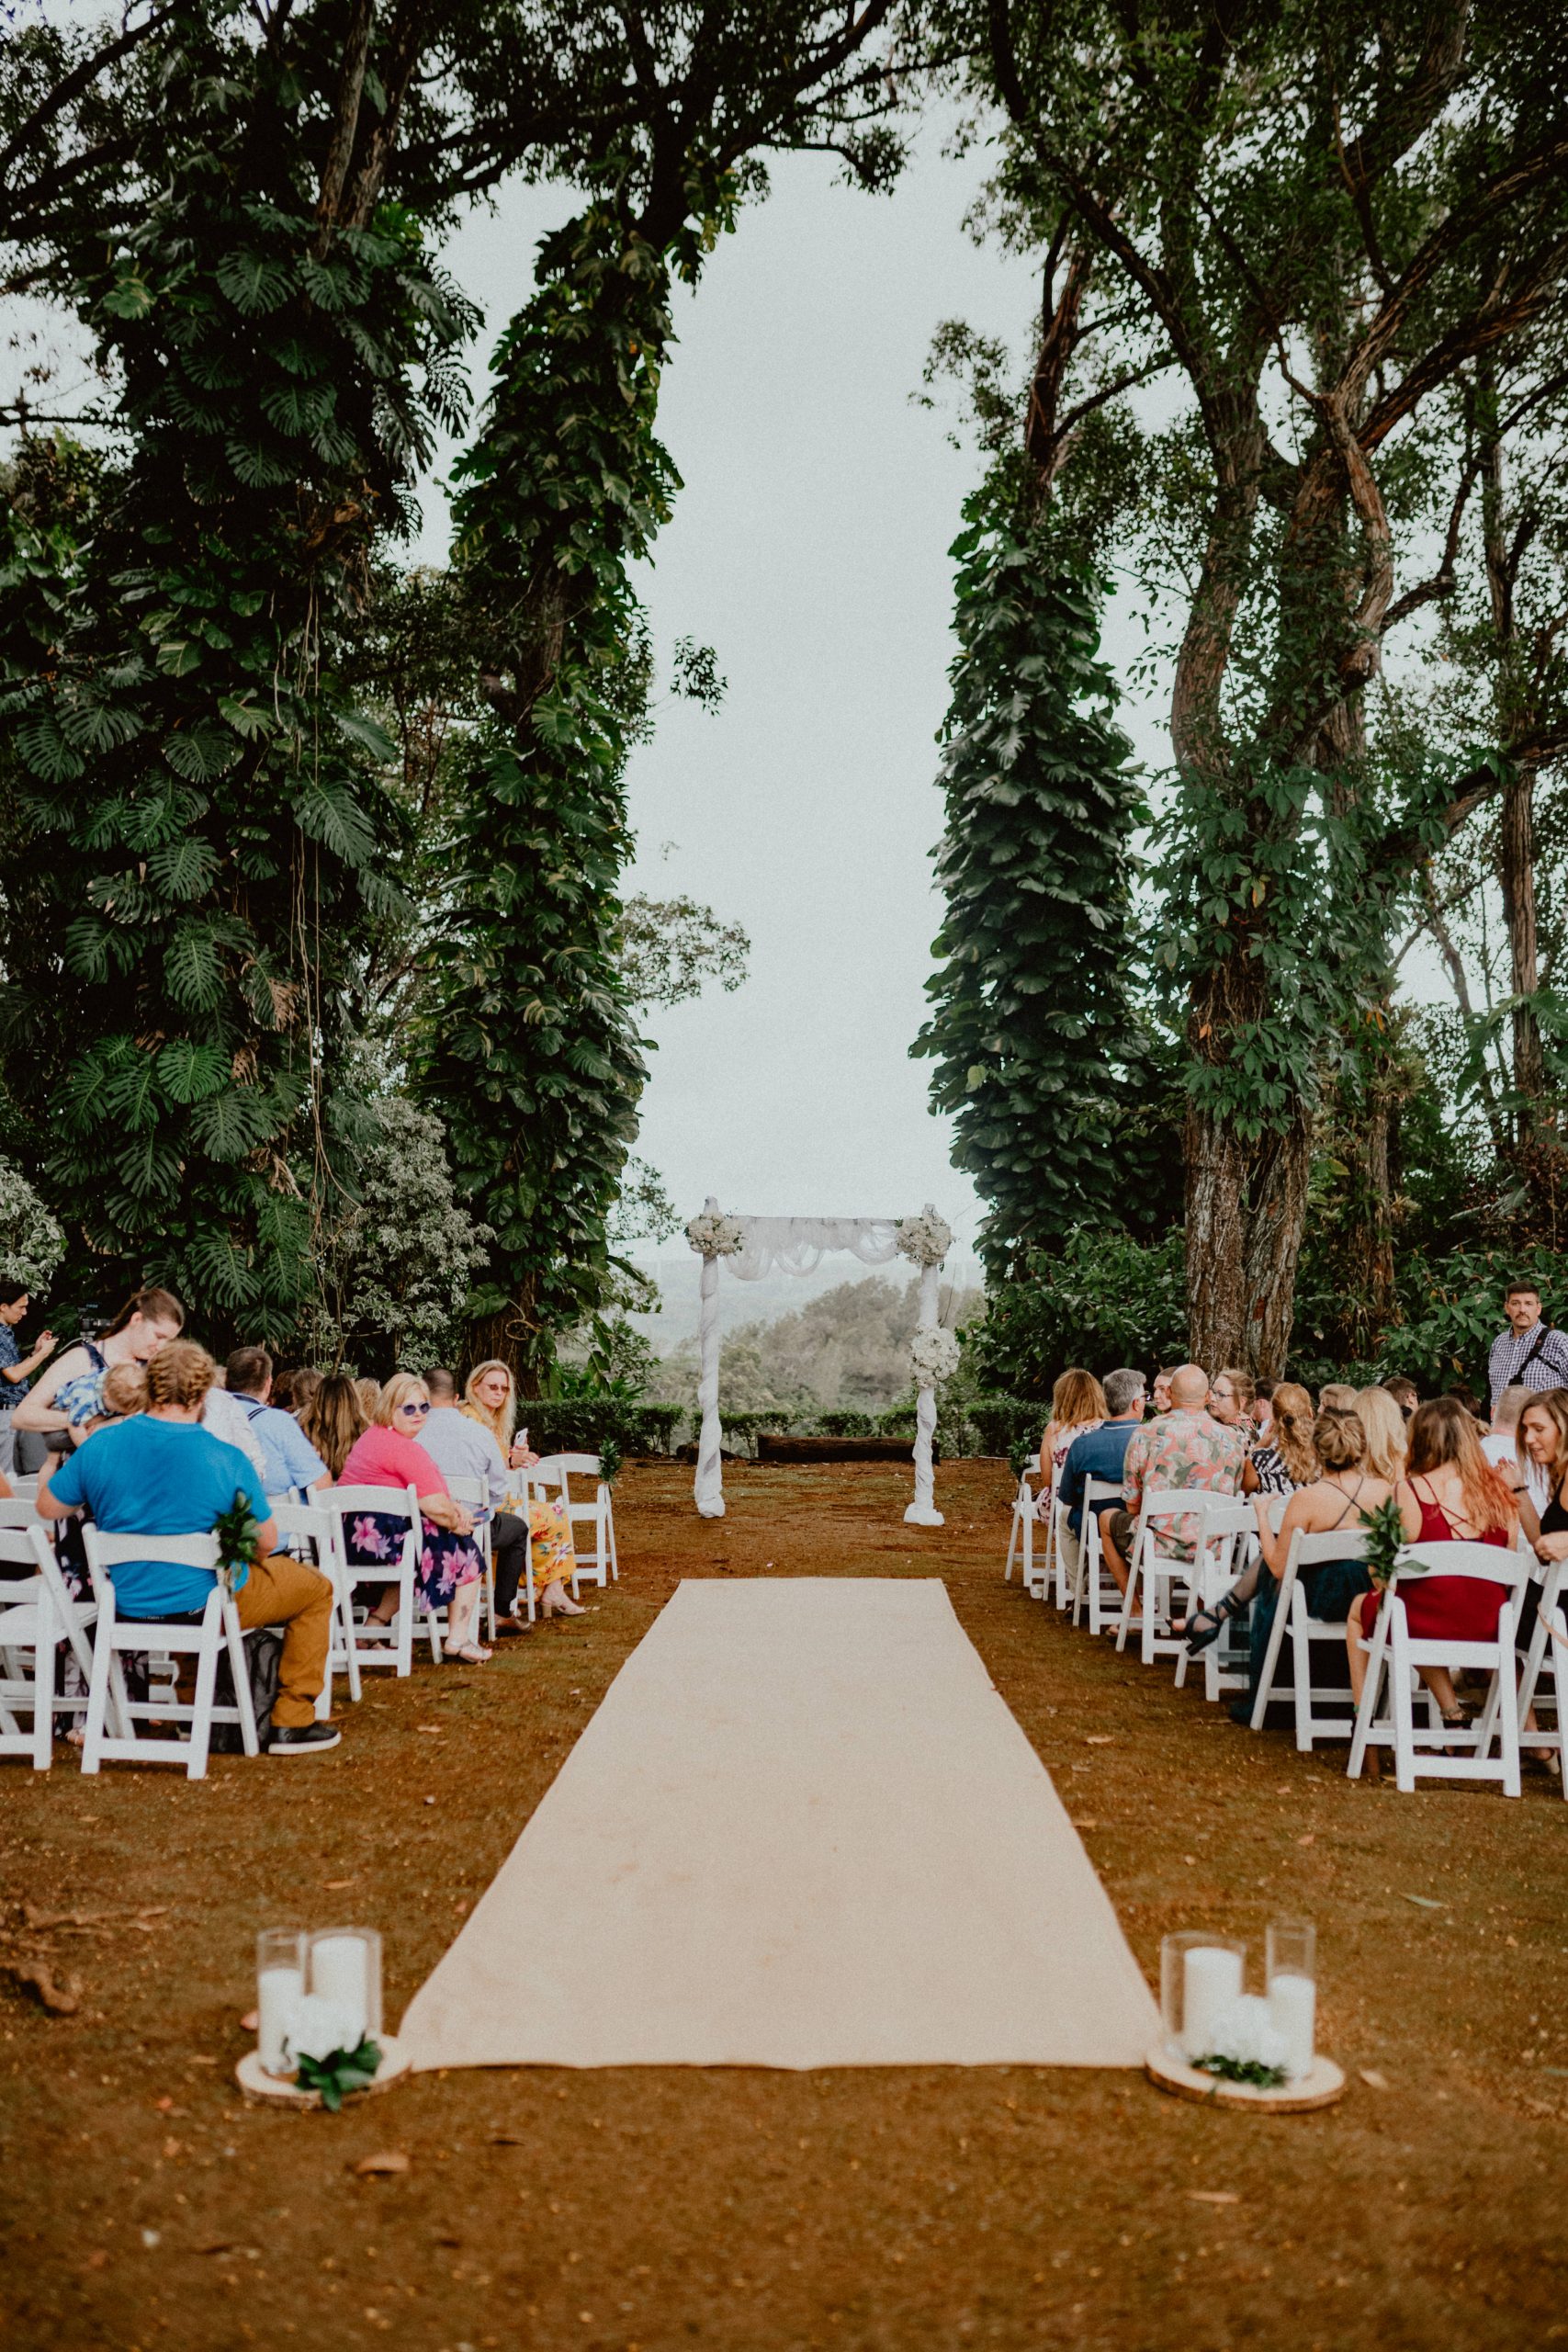 Hawaiian jungle landscape at Sunset Ranch looking out at the altar with wedding guests waiting for bride | Oahu Wedding Photographer, Oahu Elopement Photographer, Destination Wedding Photographer, Destination Elopement Photographer, Newlywed moments ideas, Newlywed Photography inspiration, Hawaii Elopement ideas | chelseaabril.com